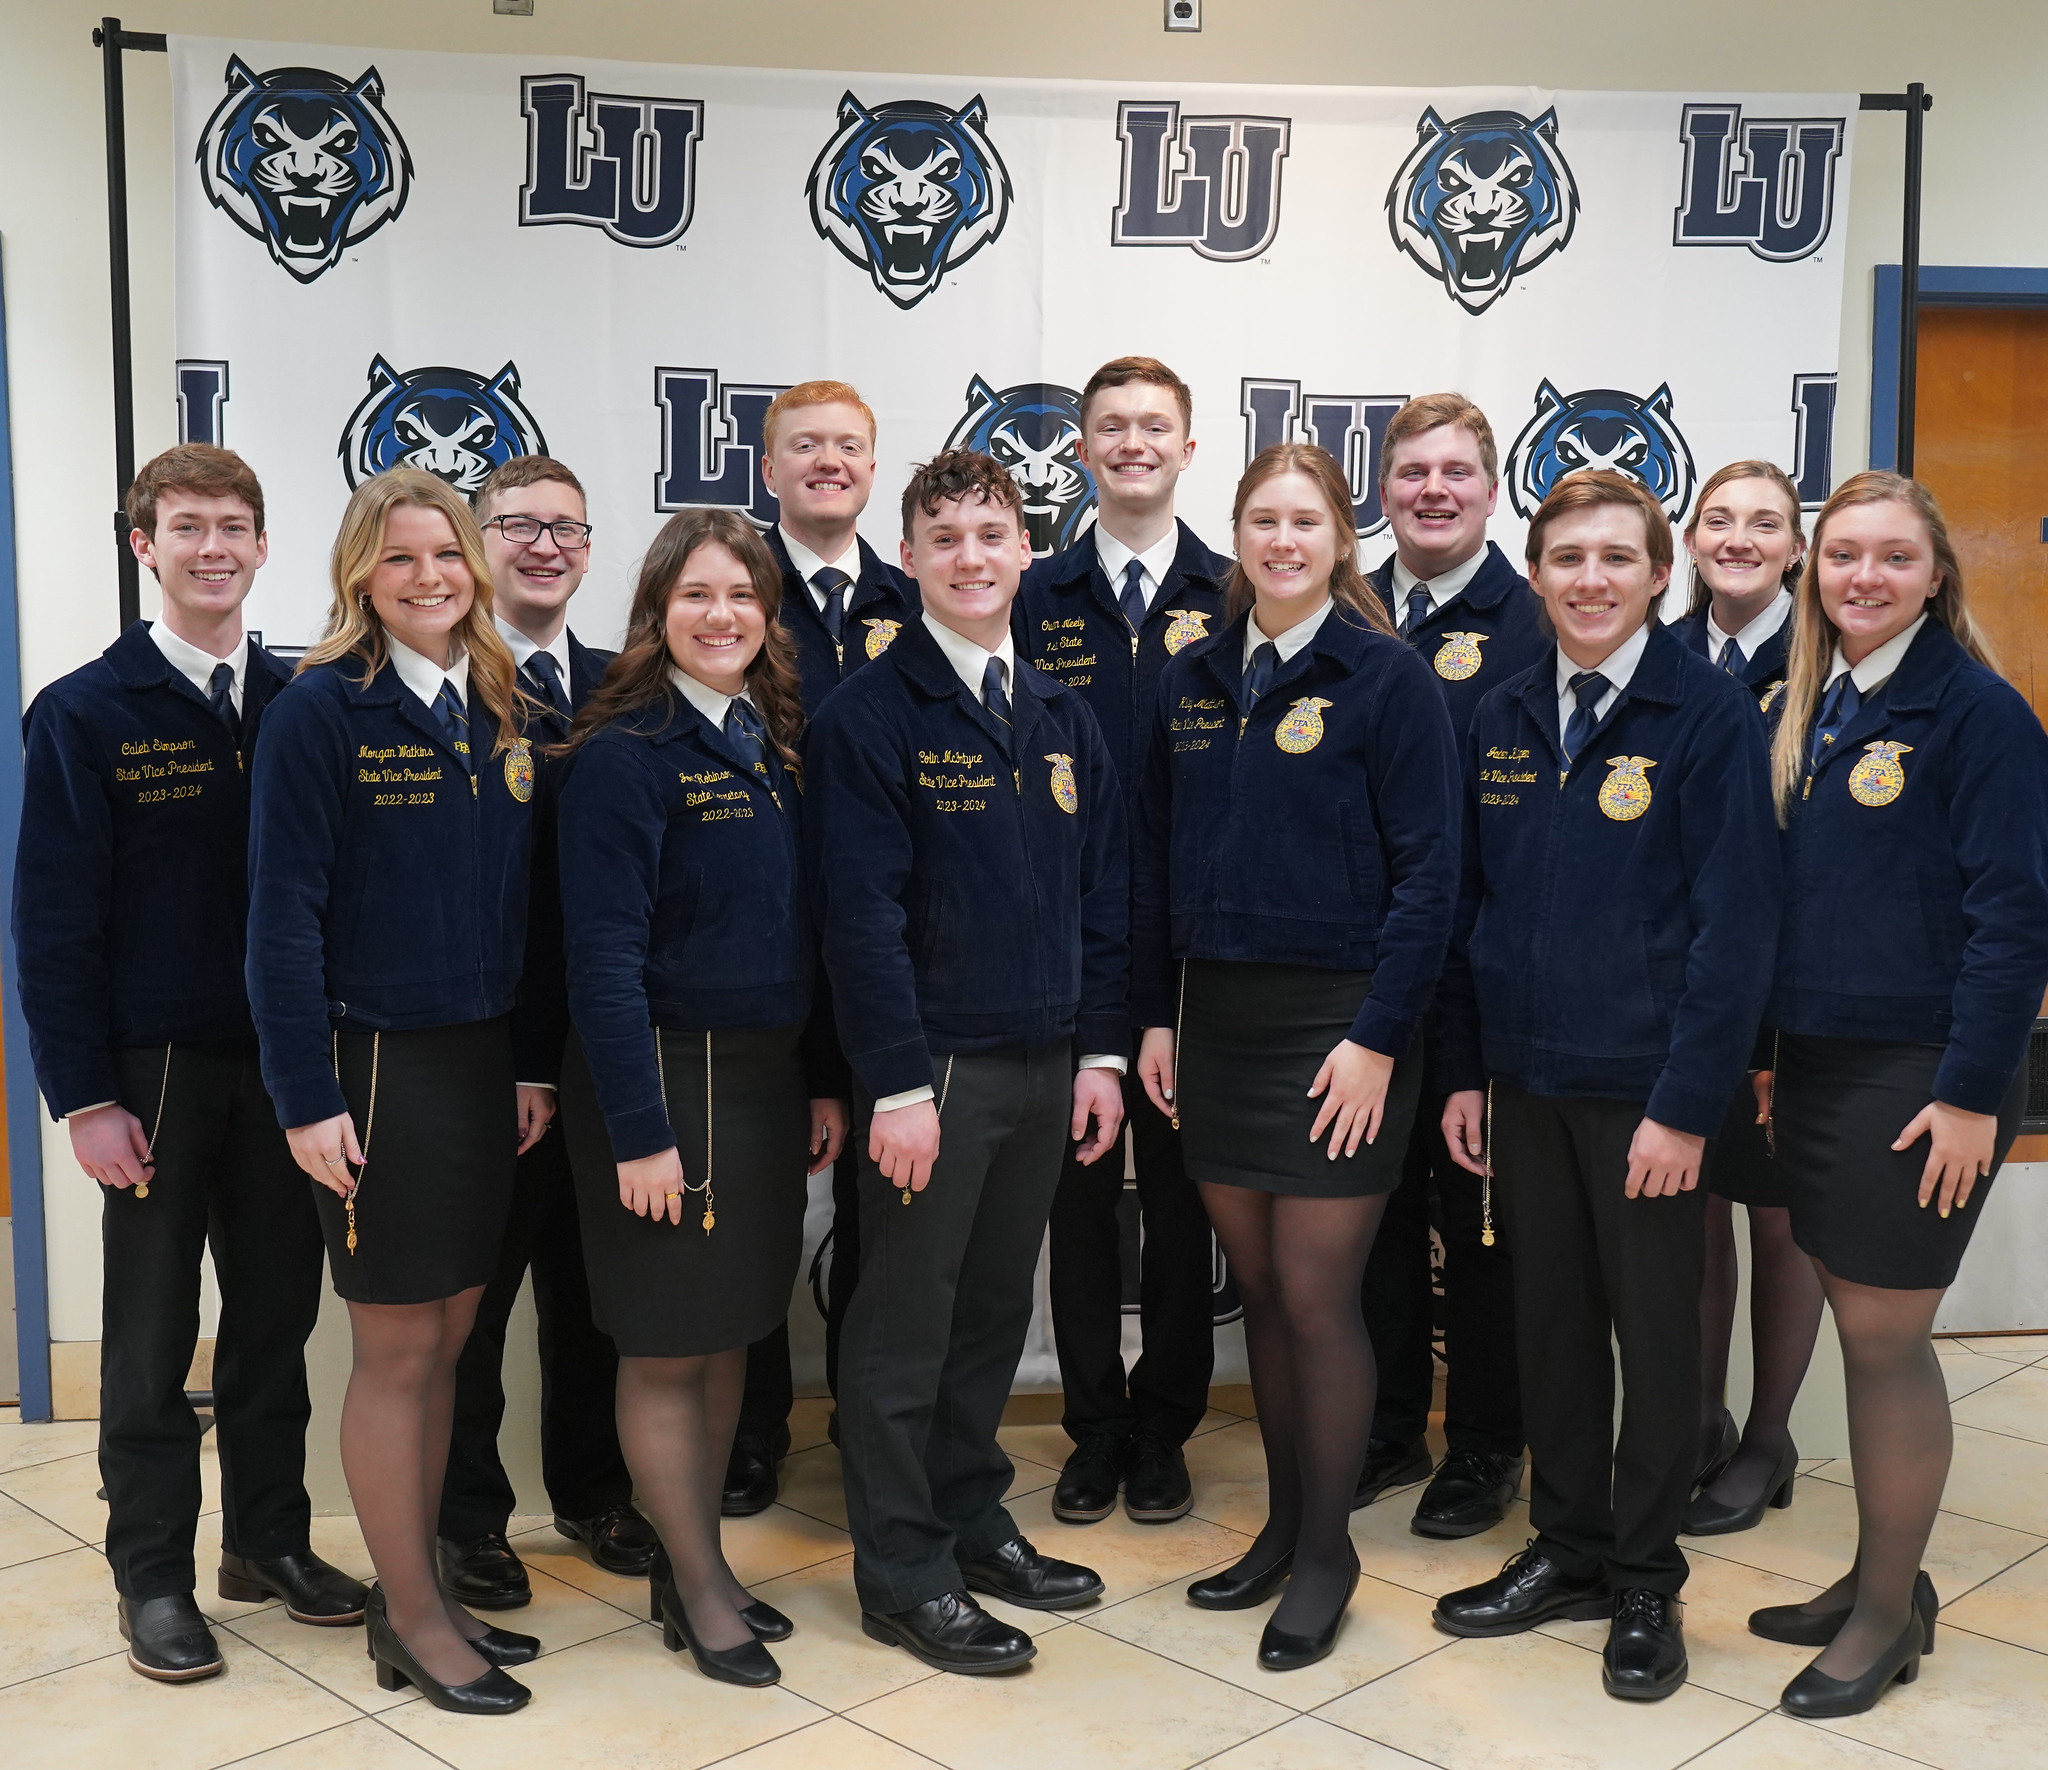 The Missouri State FFA Officer Team takes a group photo together at Lincoln University before traveling to other Greenhand Conferences across the state. 